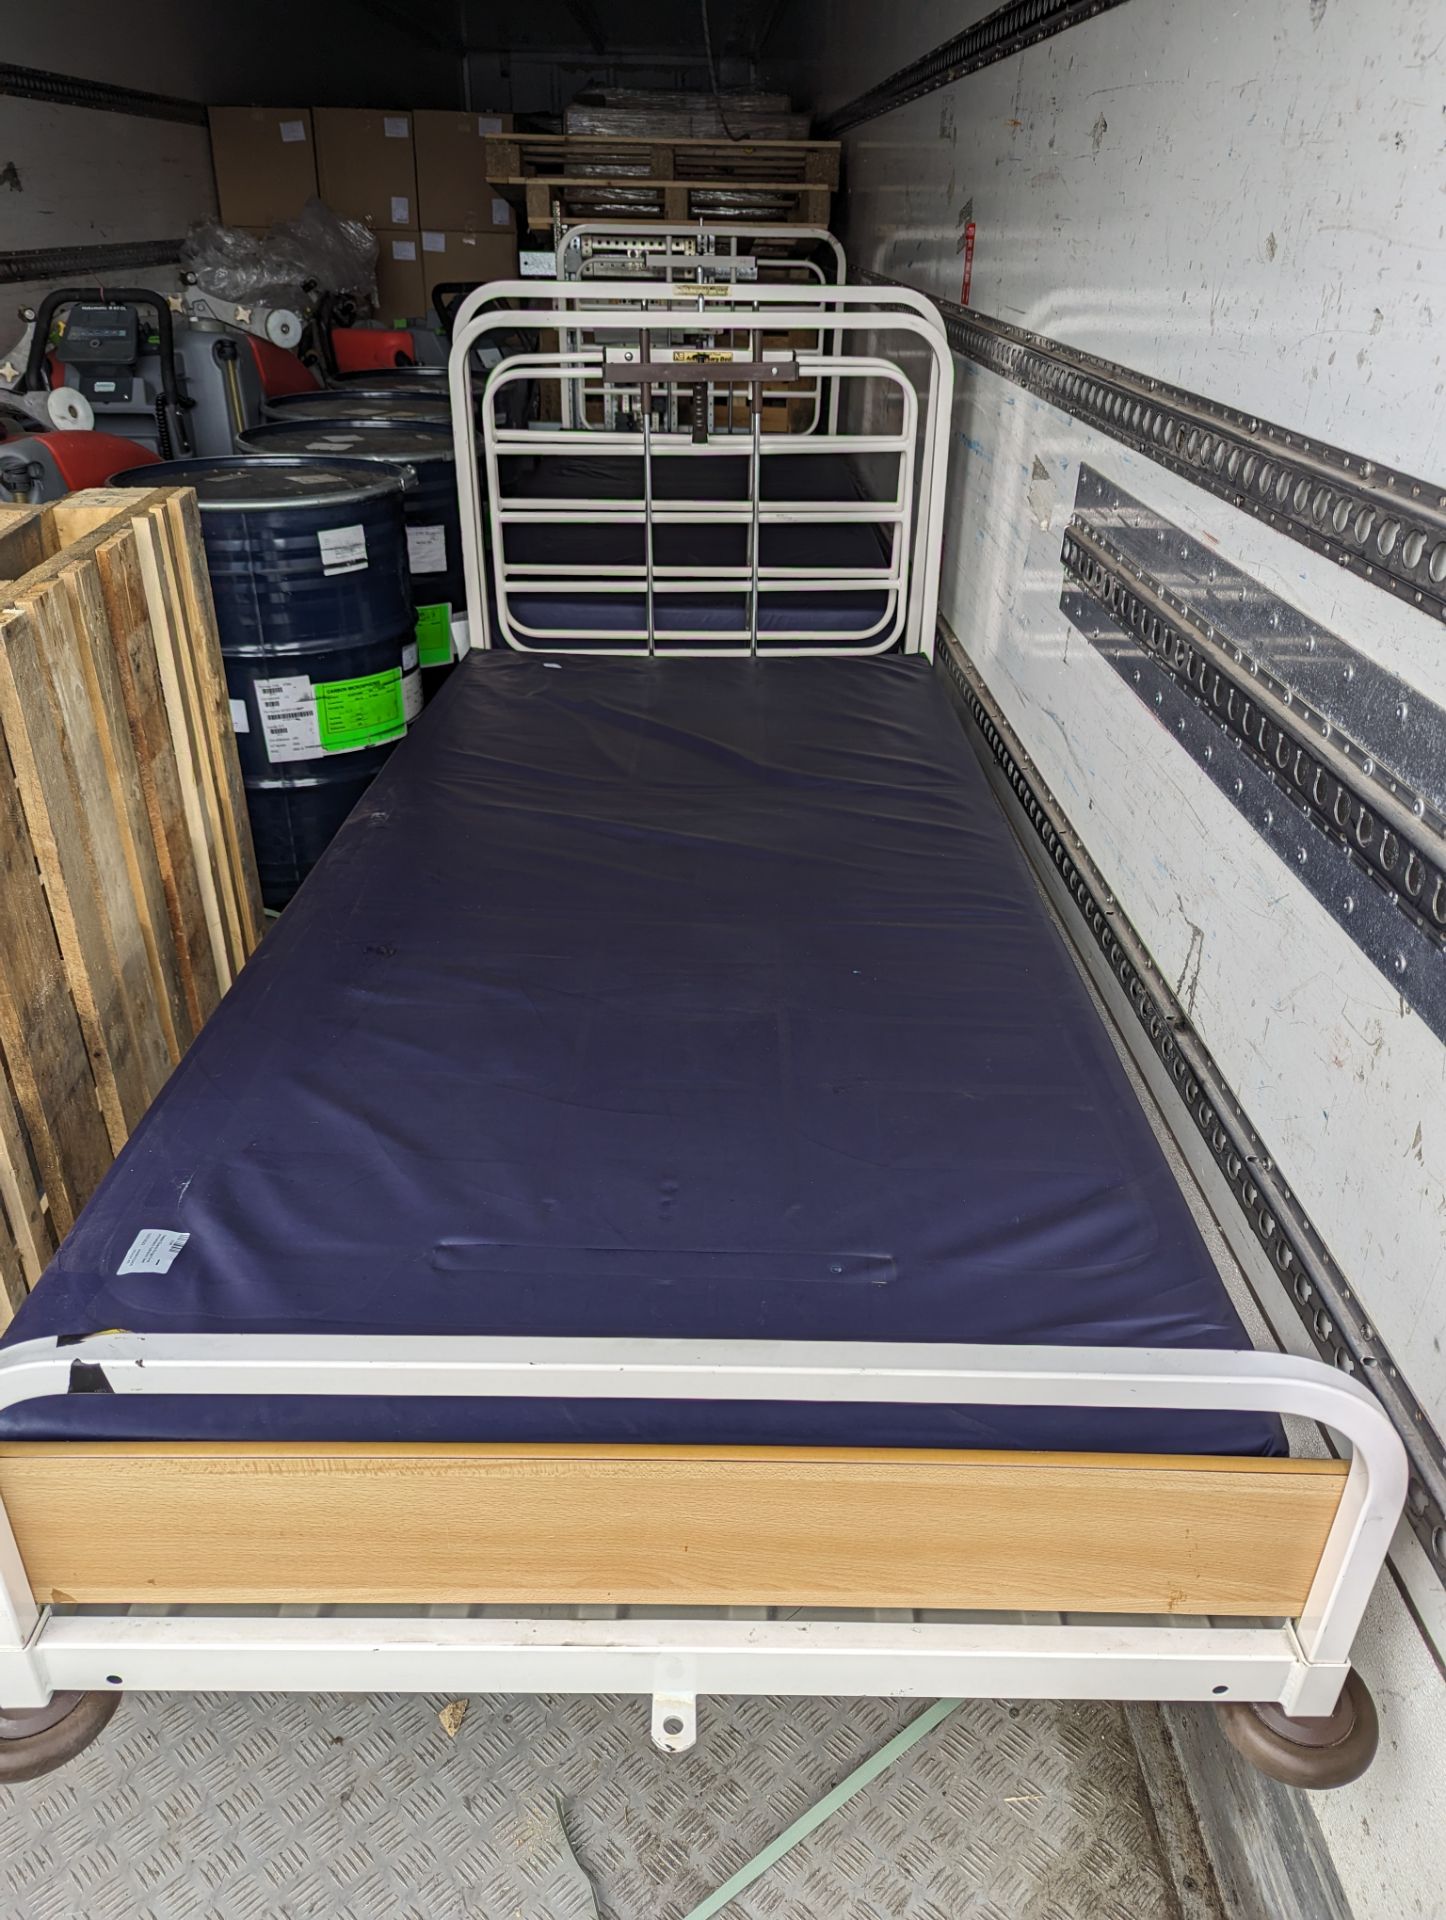 2x Nesbit Evans Hydraulic Hospital Bed With Mattresses - Image 3 of 4